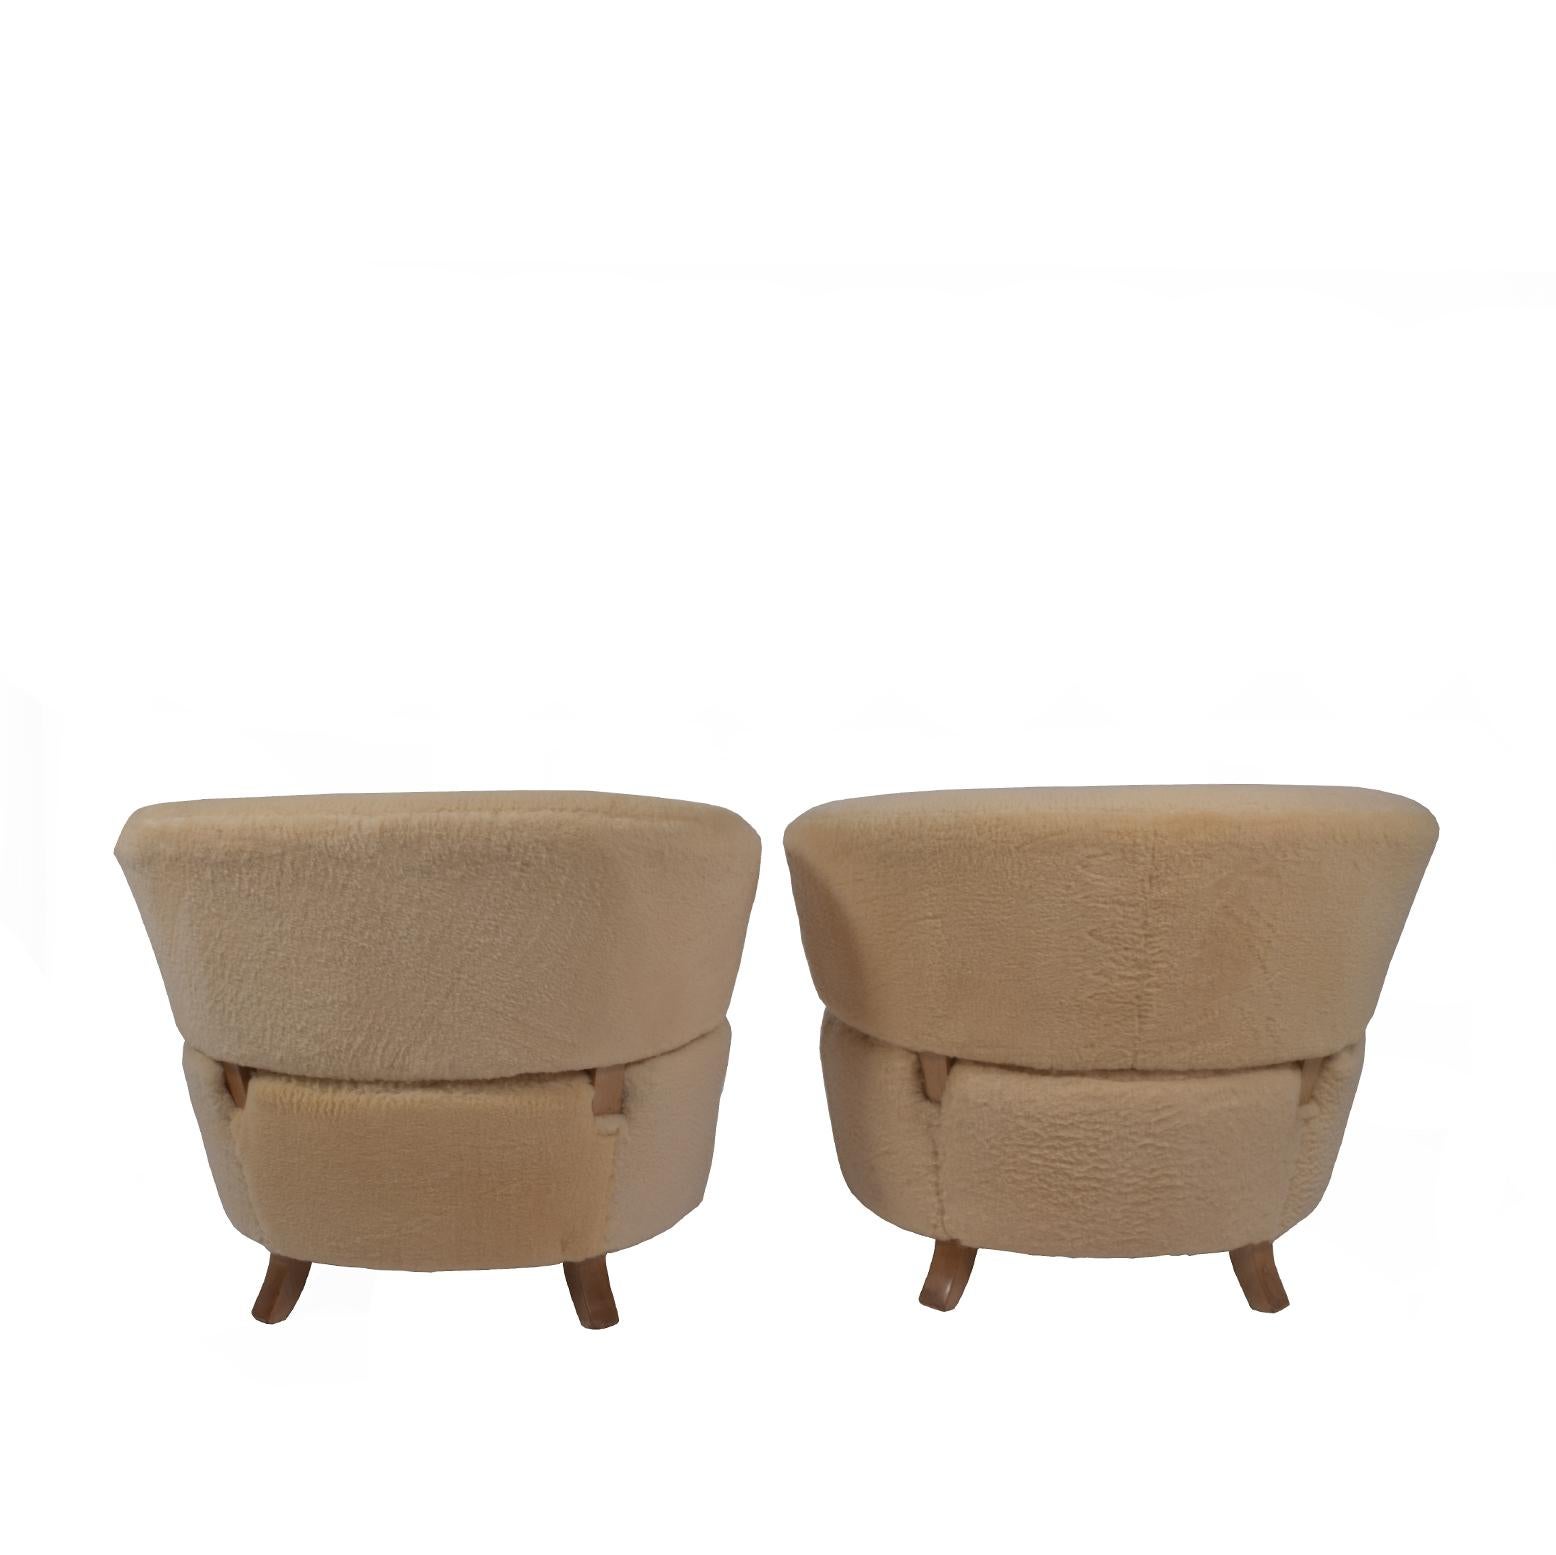 Mid-20th Century Gilbert Rohde Pair of Lounge Chairs Herman Miller, 1940